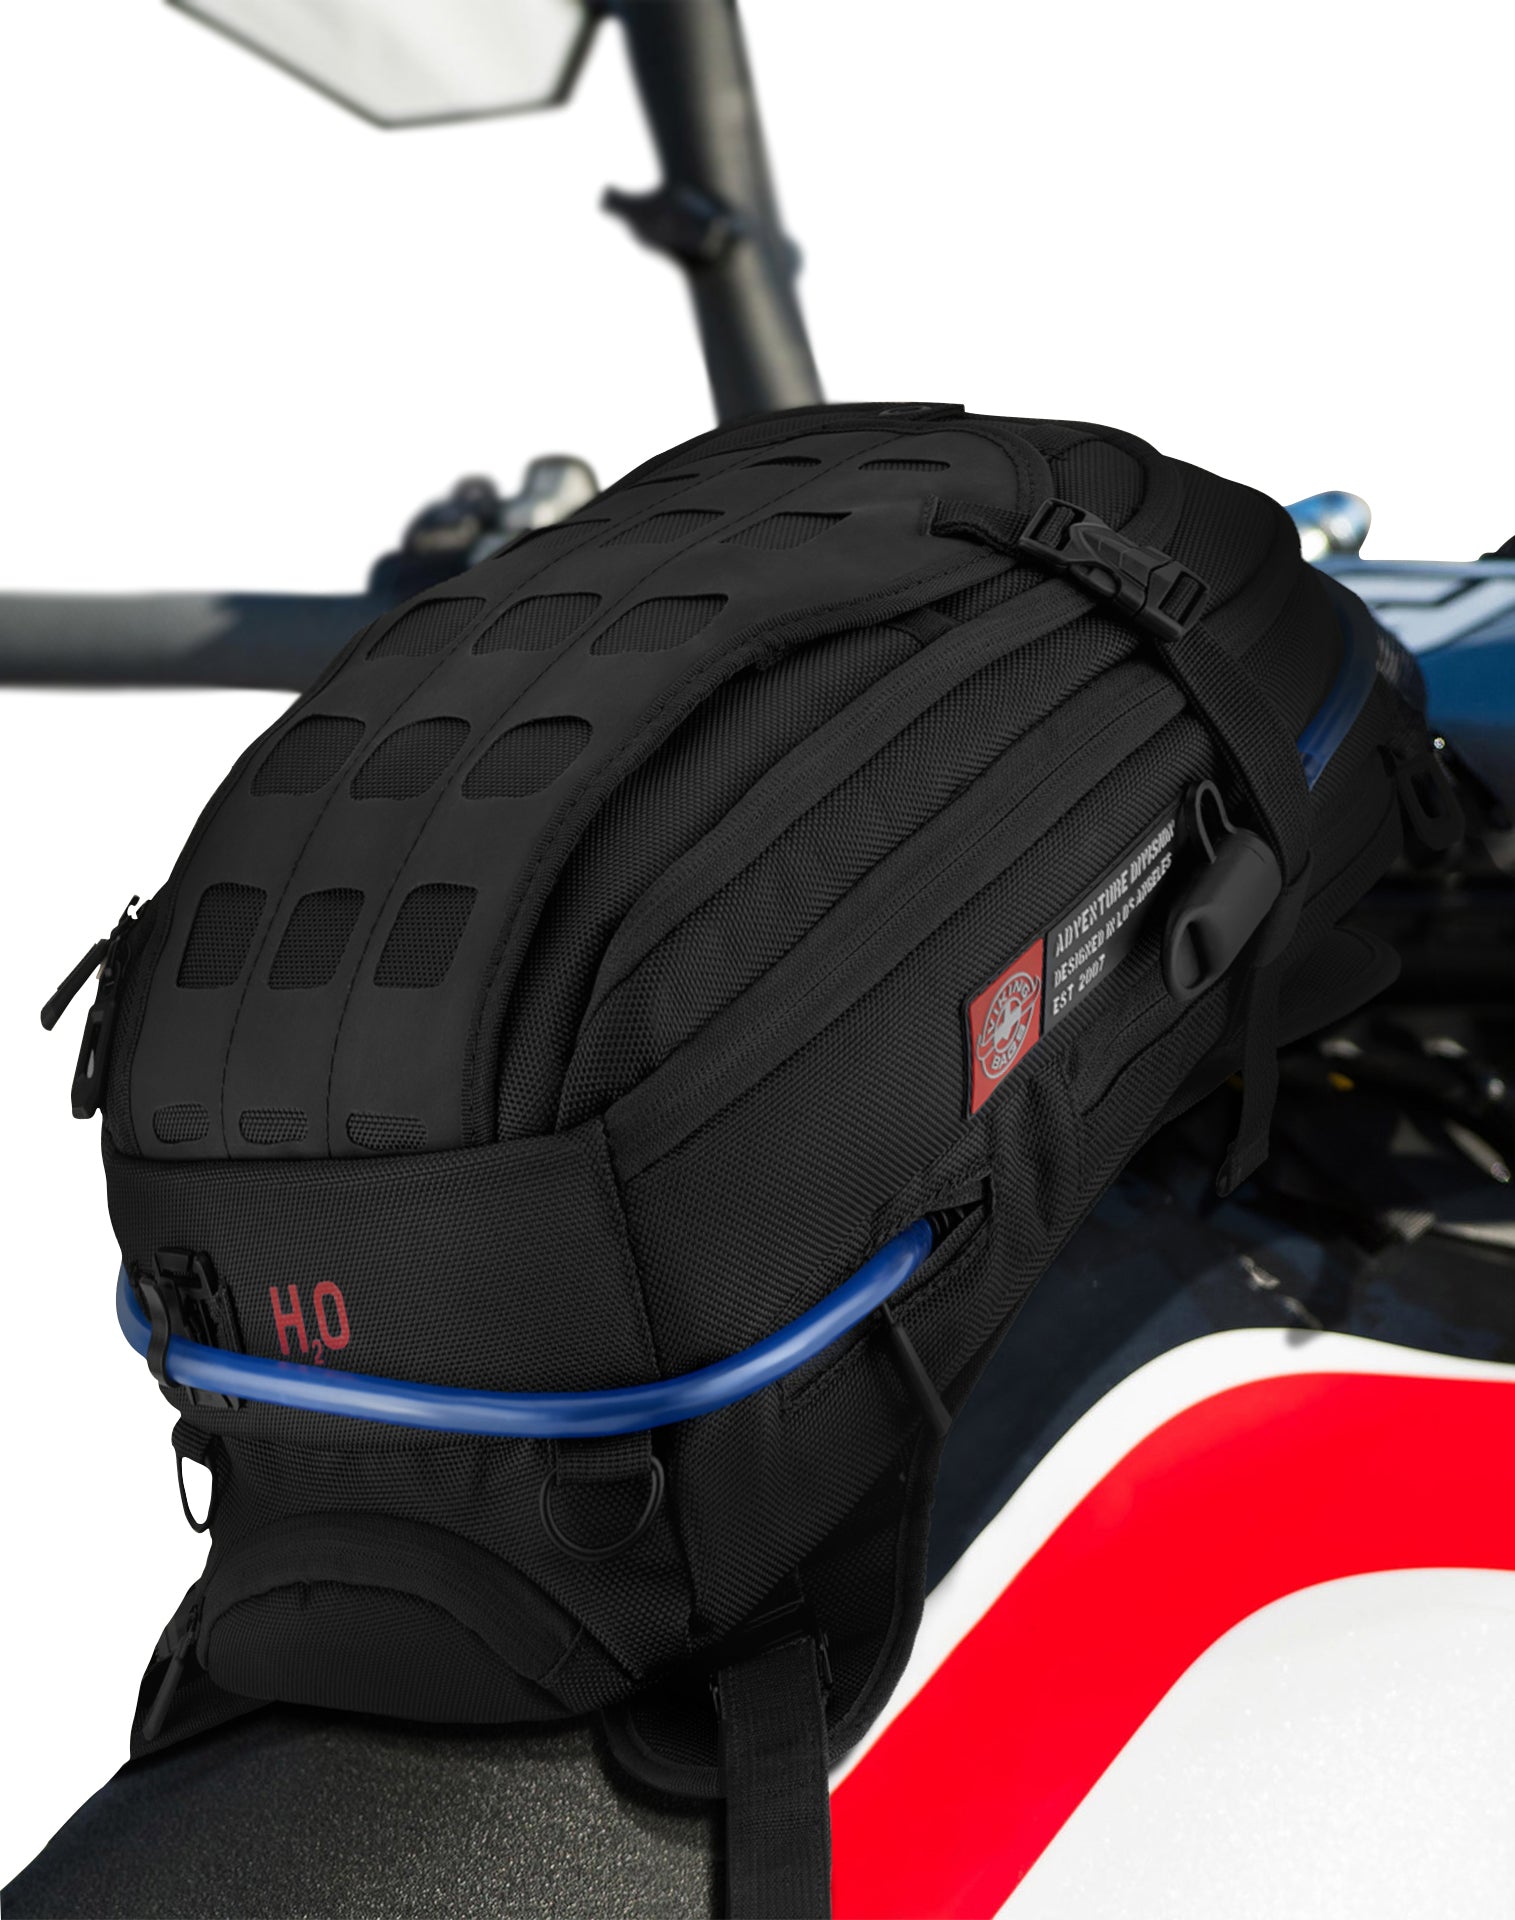 Viking Apex ADV Touring Tank Bag with Hydration Pack for Harley Davidson on Tank